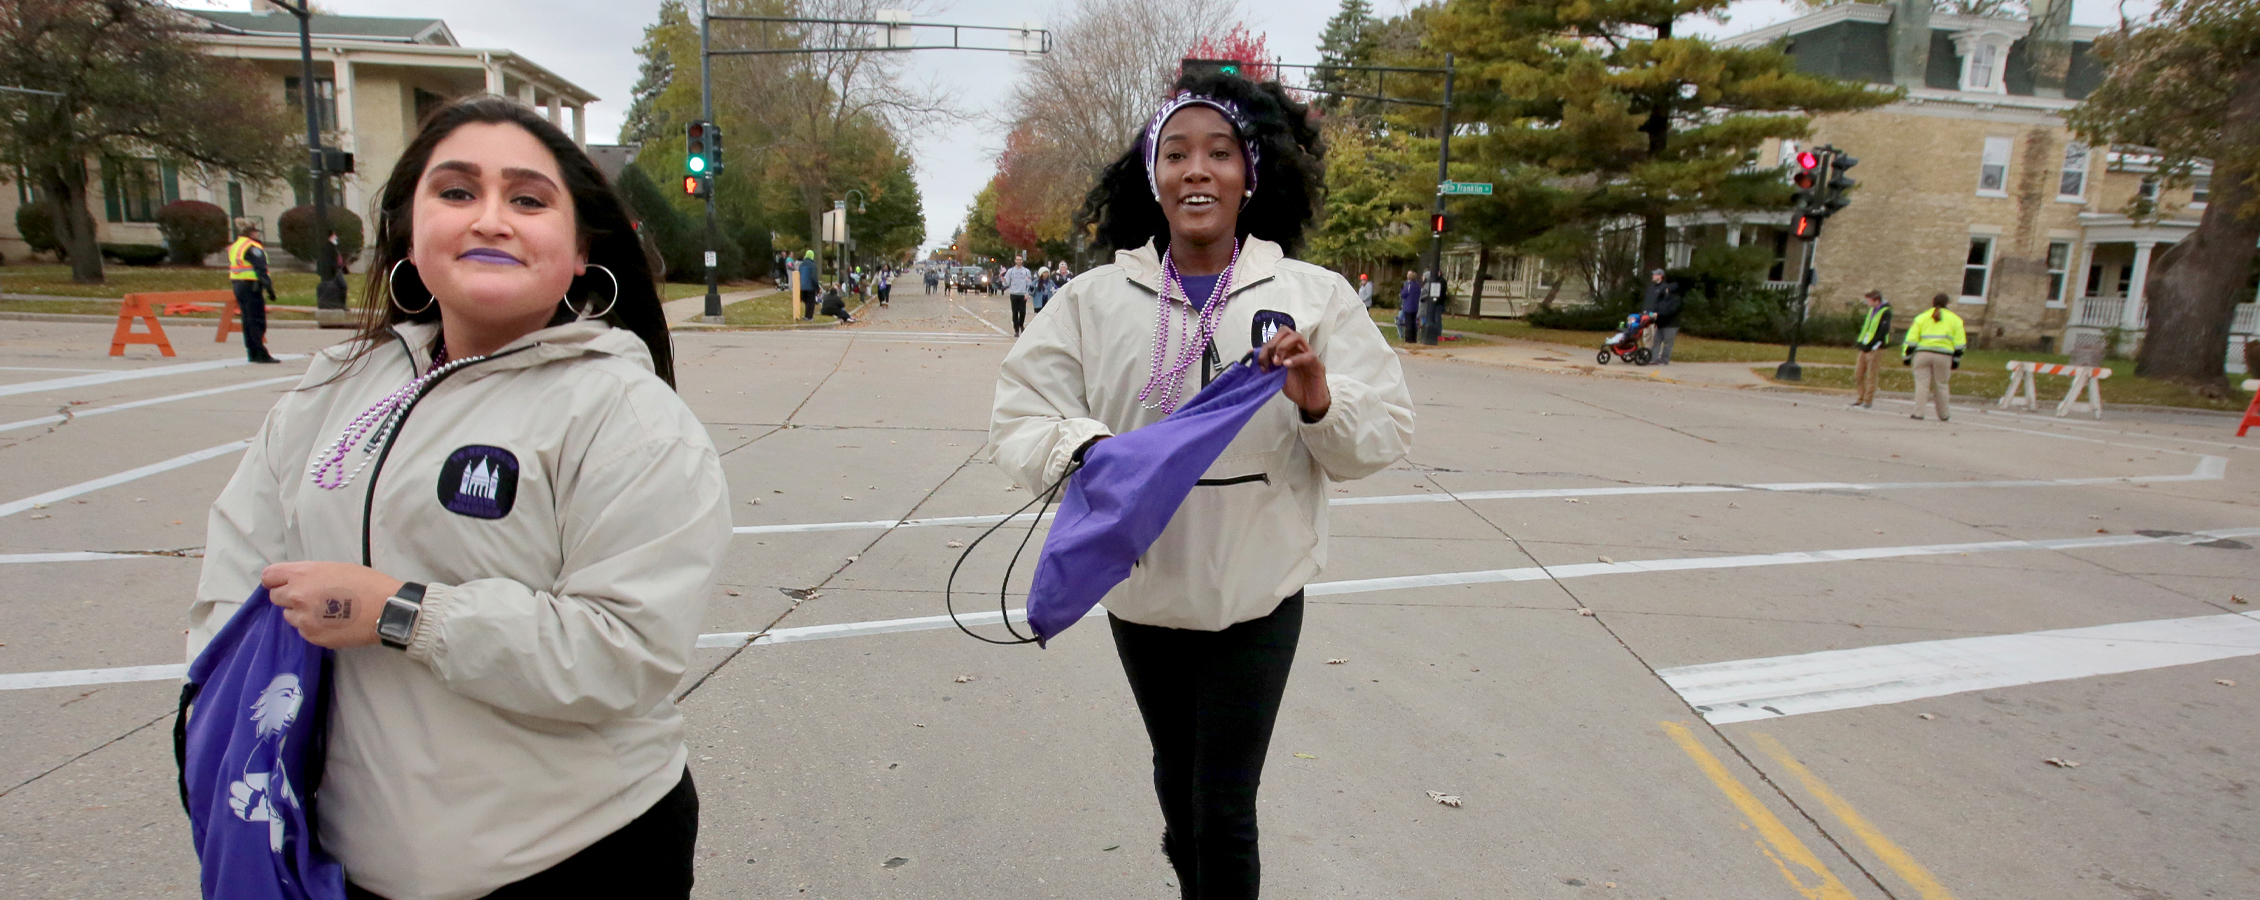 Two students participate in community events as they walk down the street.